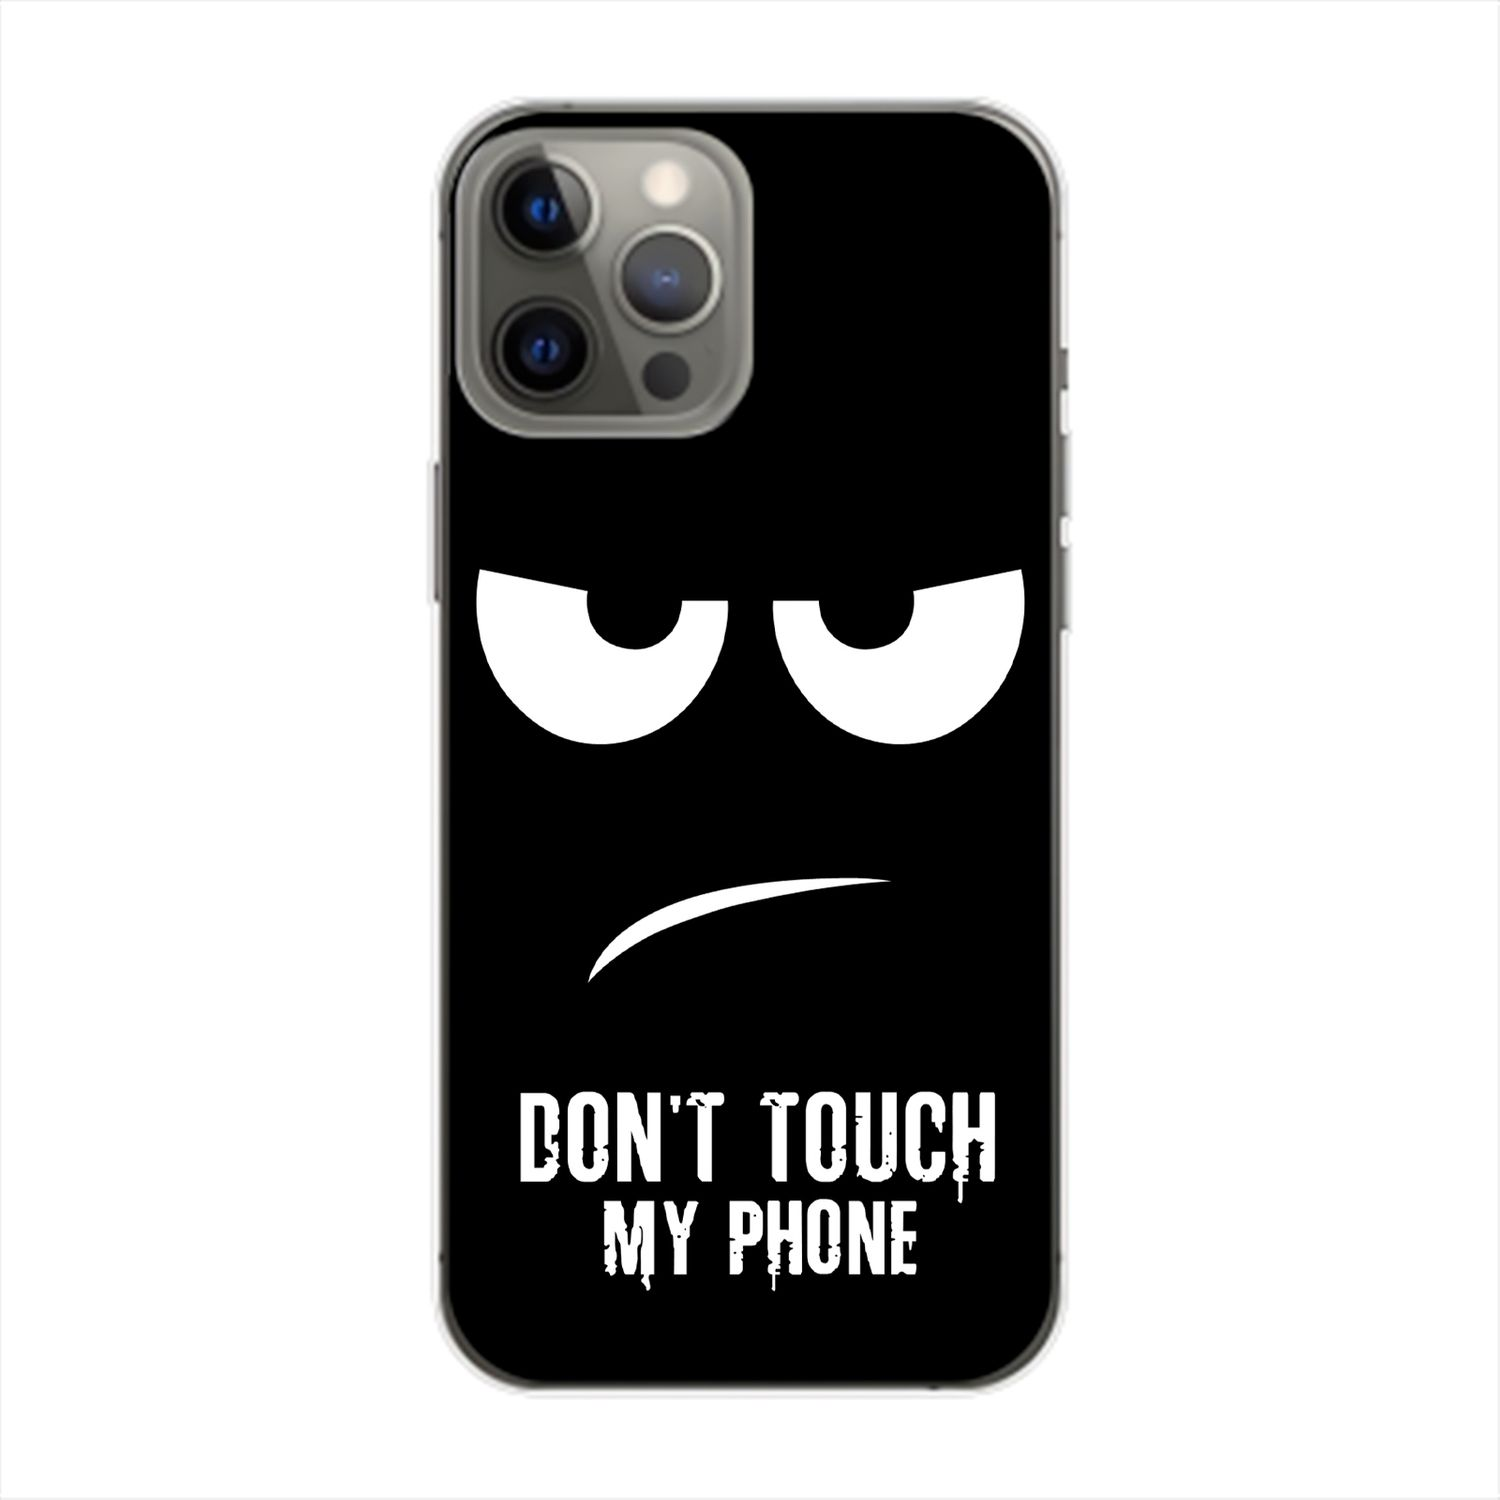 iPhone Pro Backcover, Max, Dont KÖNIG Phone 14 My Apple, Touch Schwarz DESIGN Case,